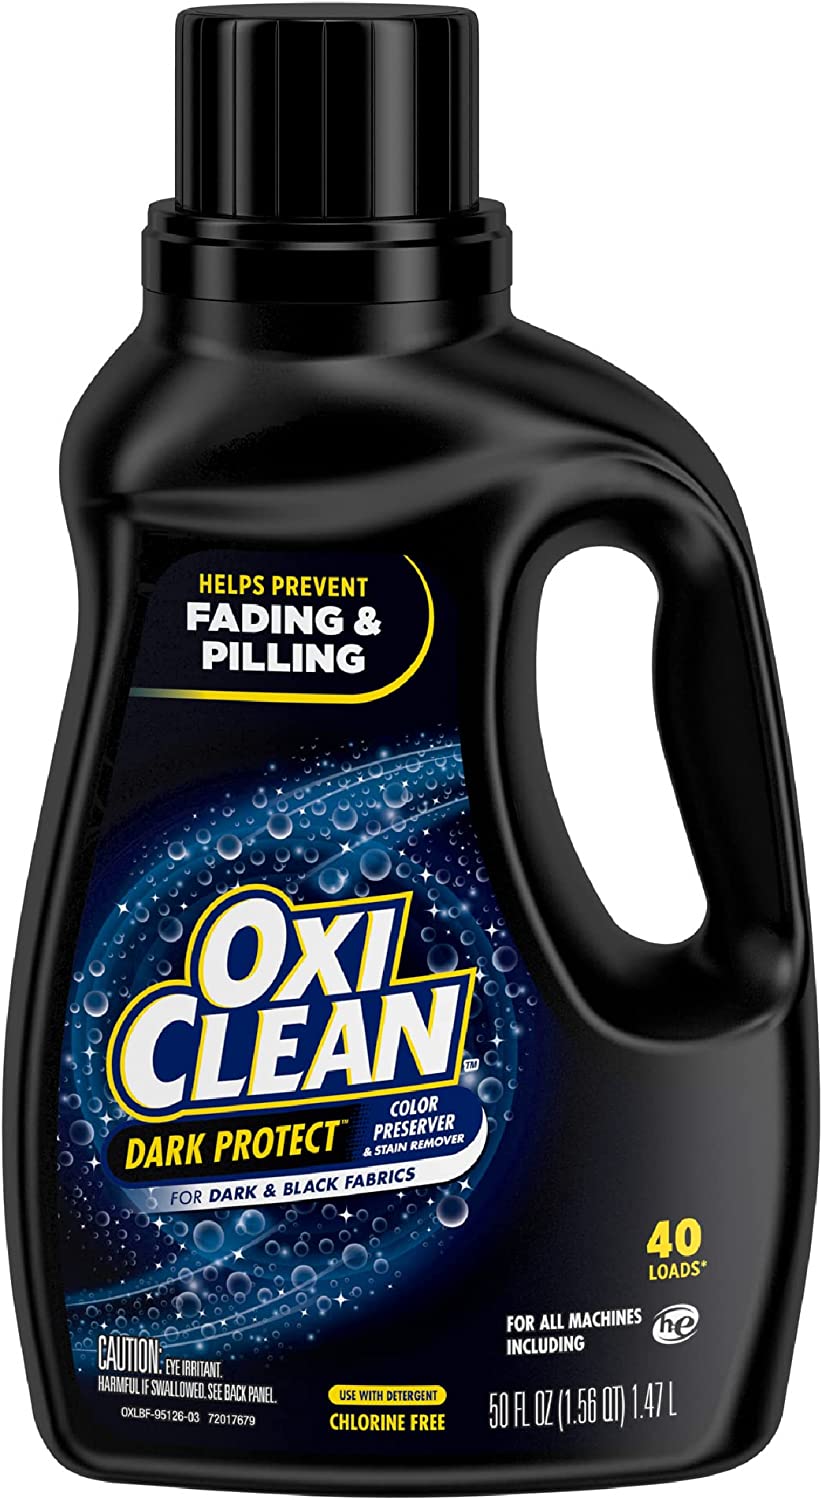 Oxiclean Dark Protect Laundry Booster